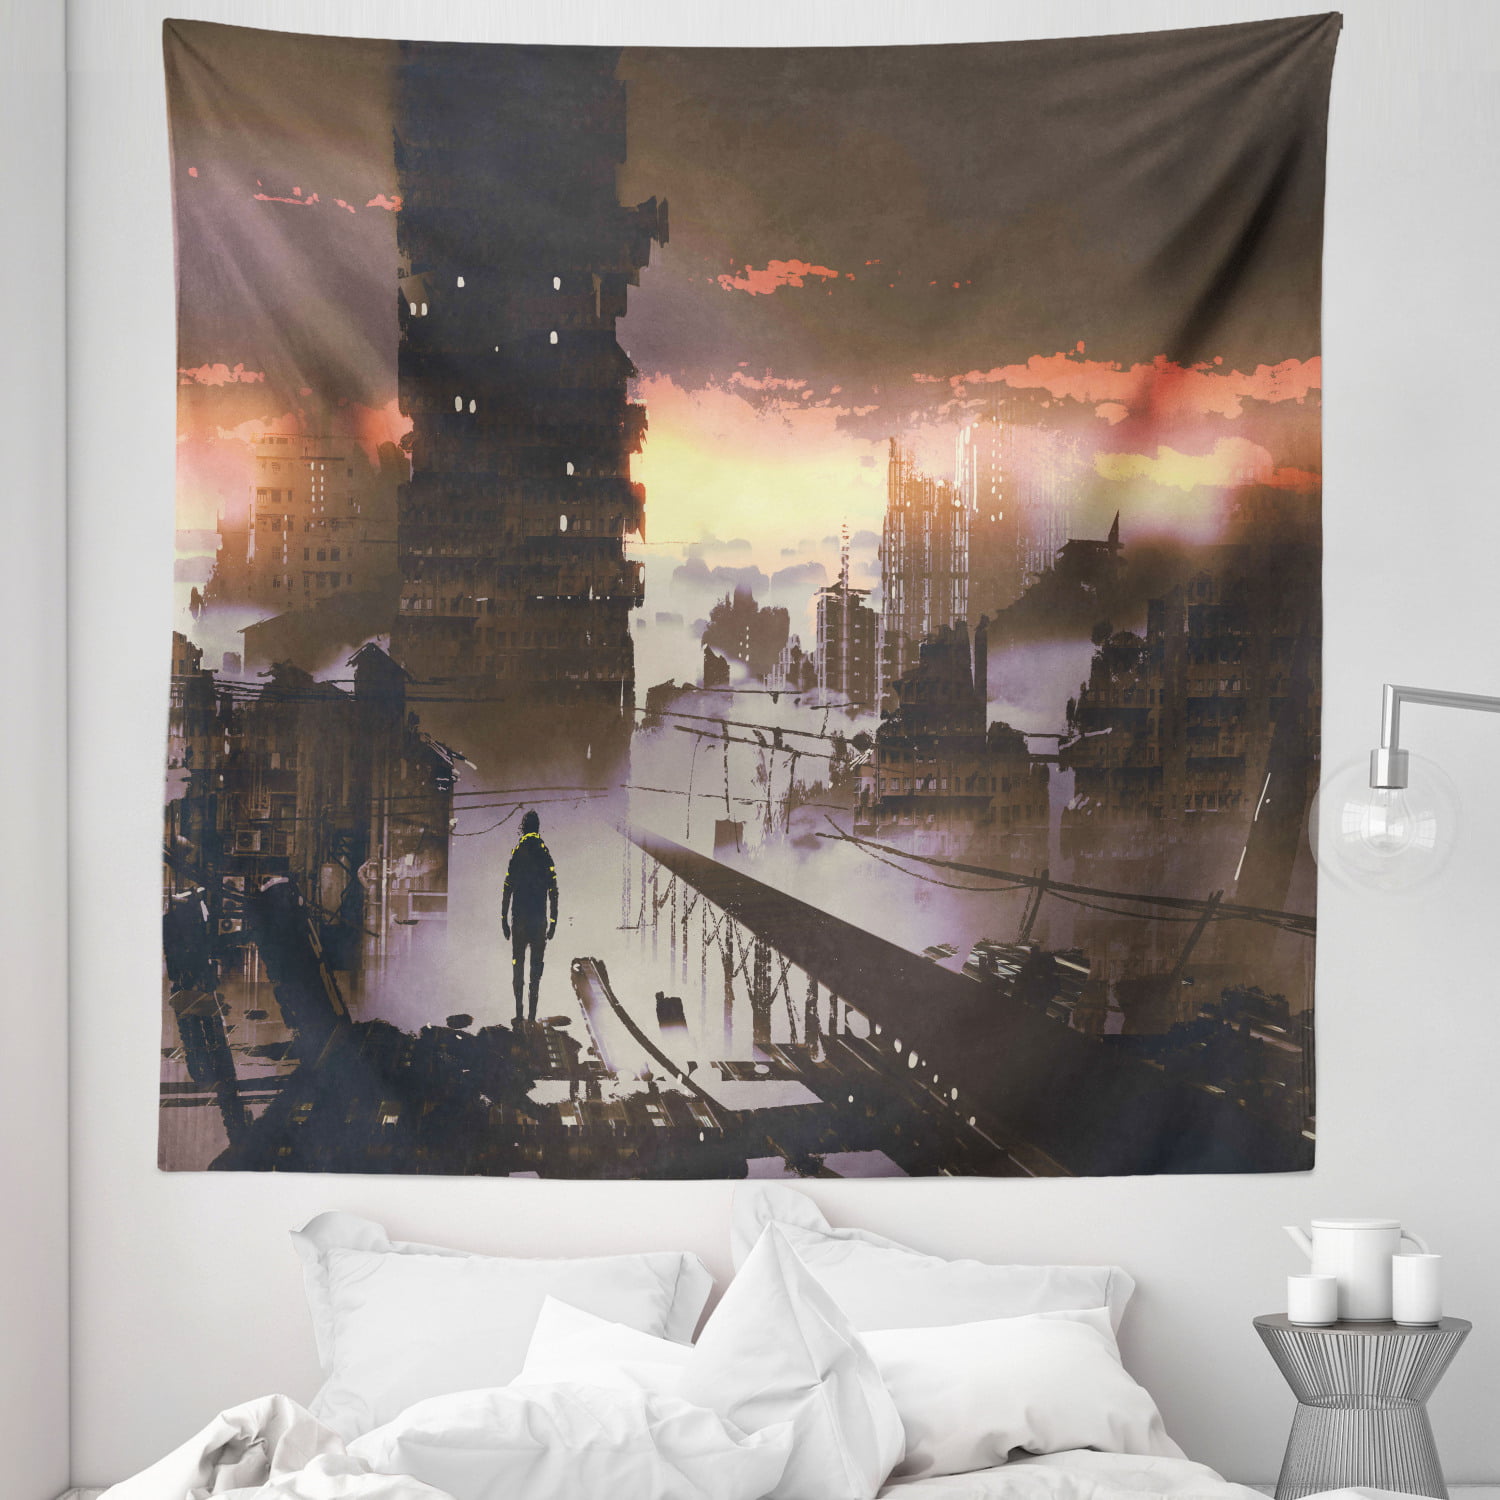 Fantasy Tapestry, Science Fiction Abandoned City with Robot Walking  Futuristic Digital Graphic, Fabric Wall Hanging Decor for Bedroom Living  Room Dorm, Sizes, Dark Taupe Salmon, by Ambesonne